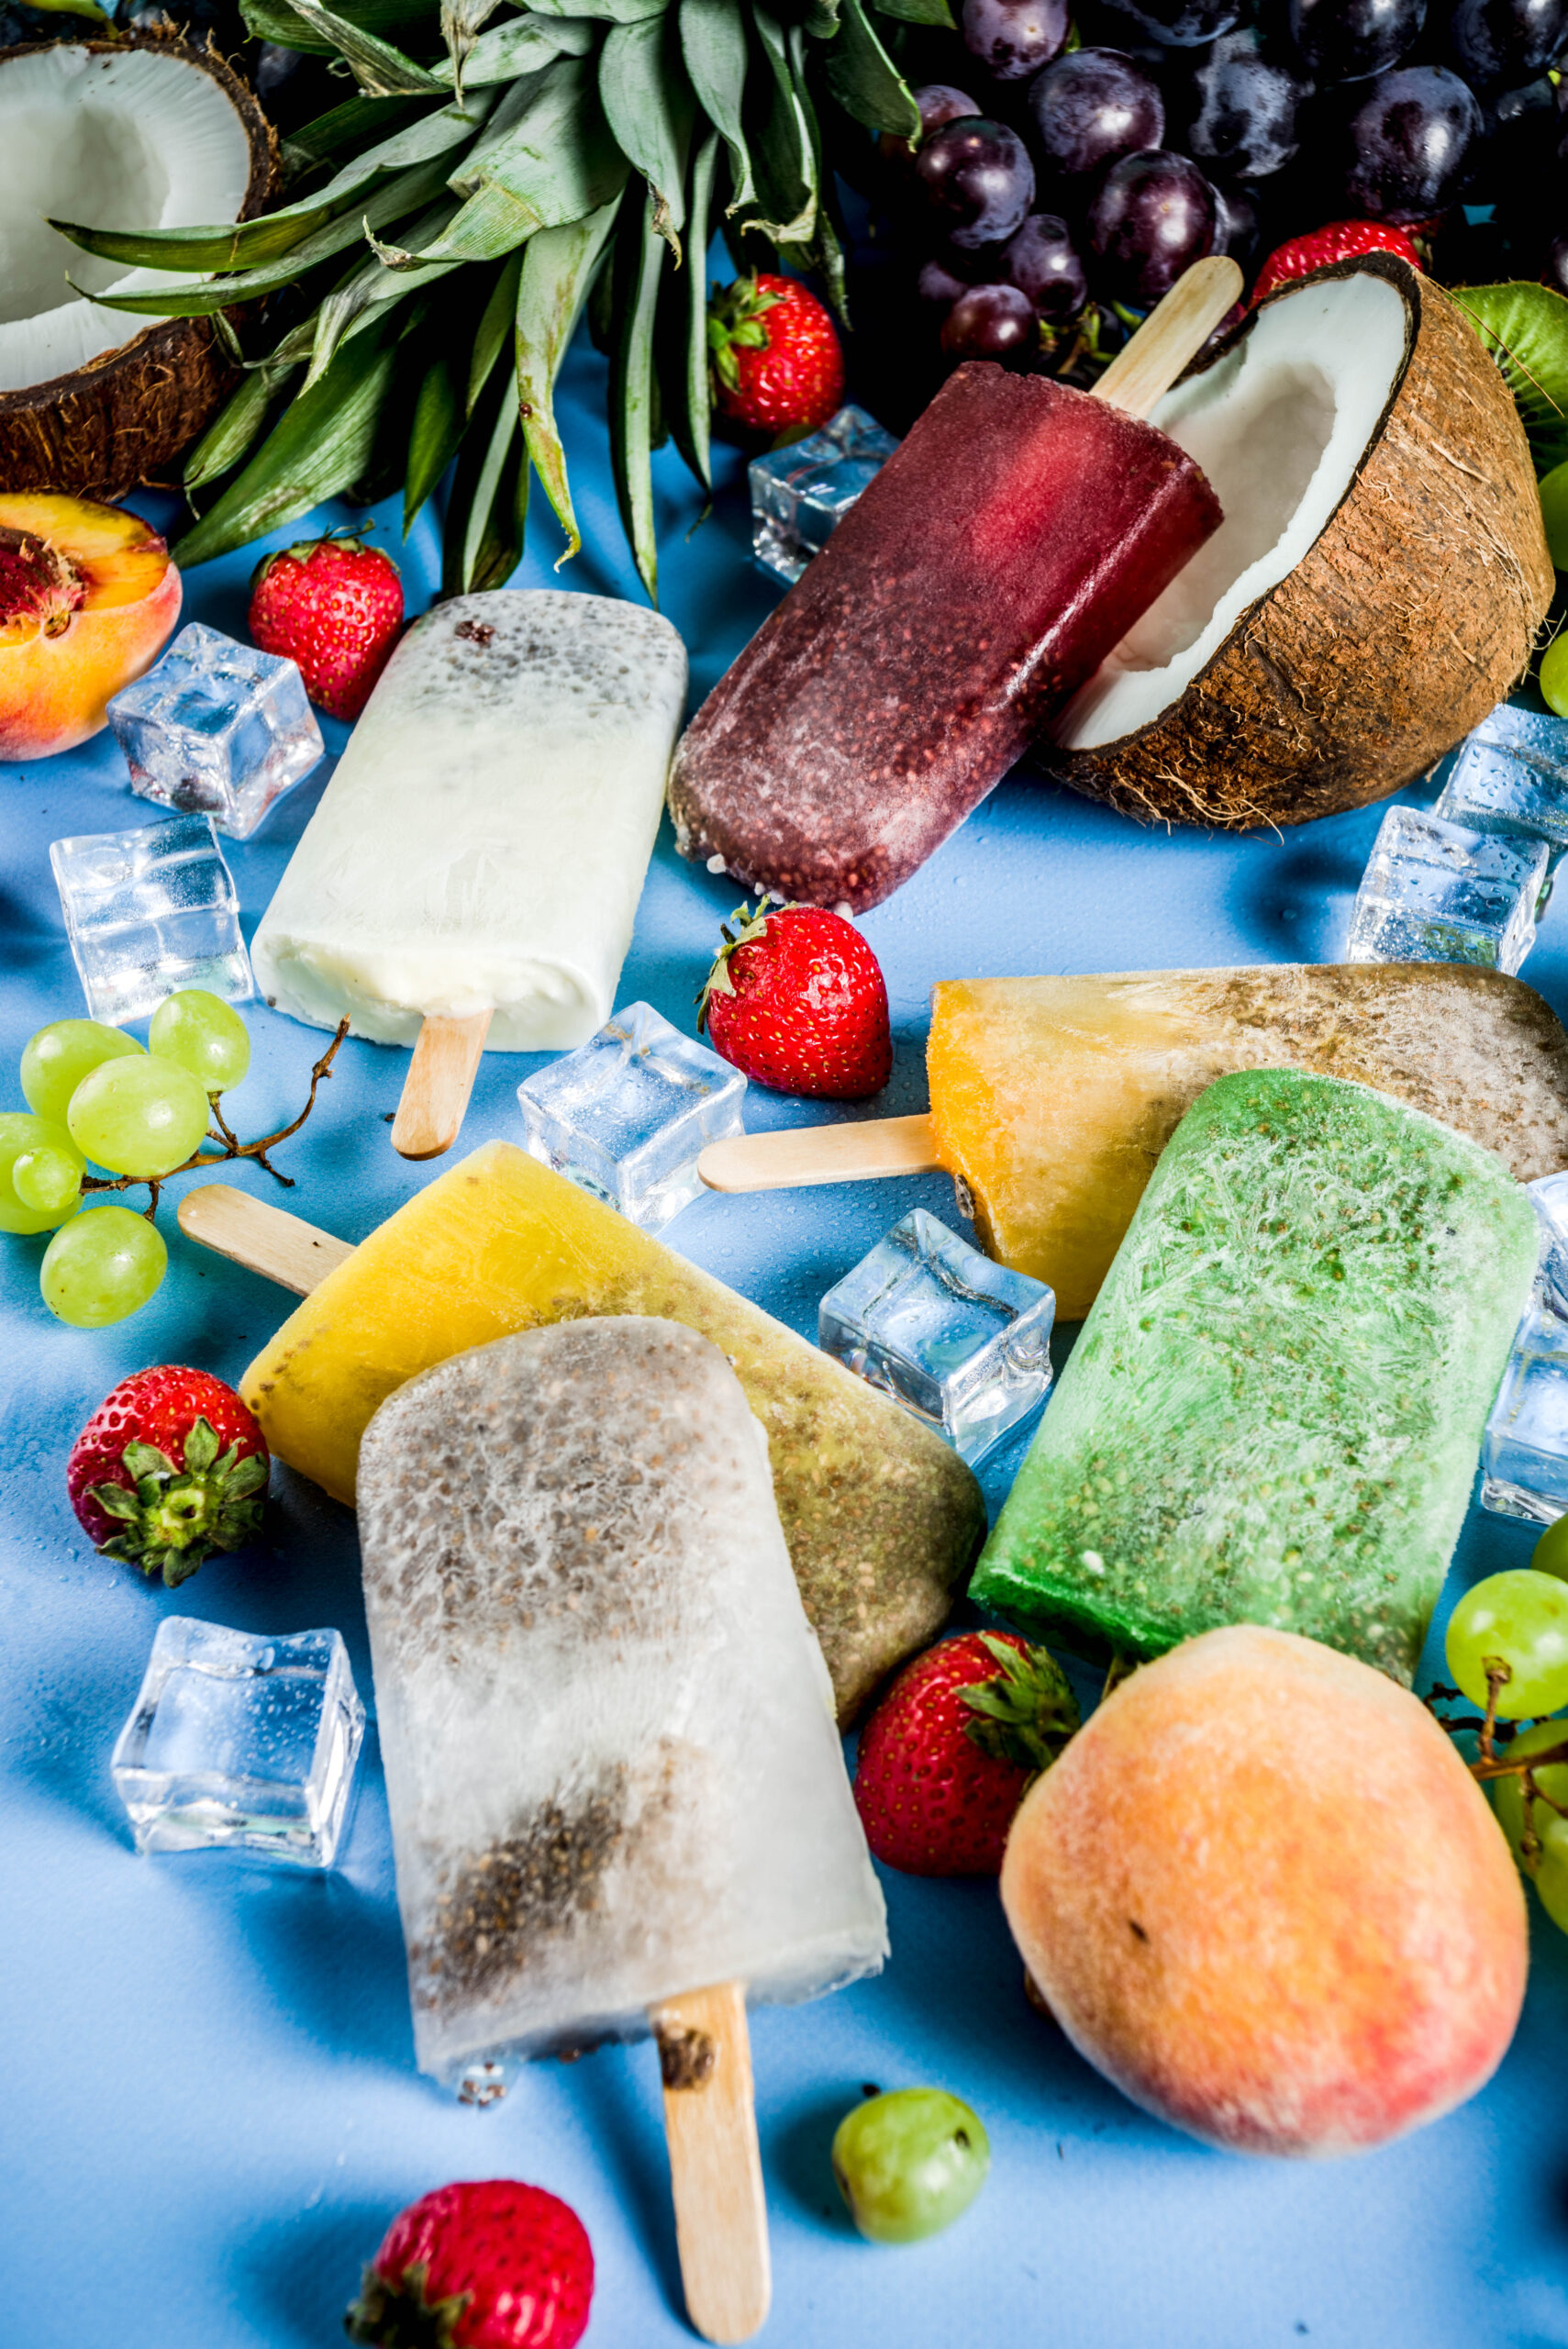 Tropical ice cream popsicles with chia seeds and fruit juices –